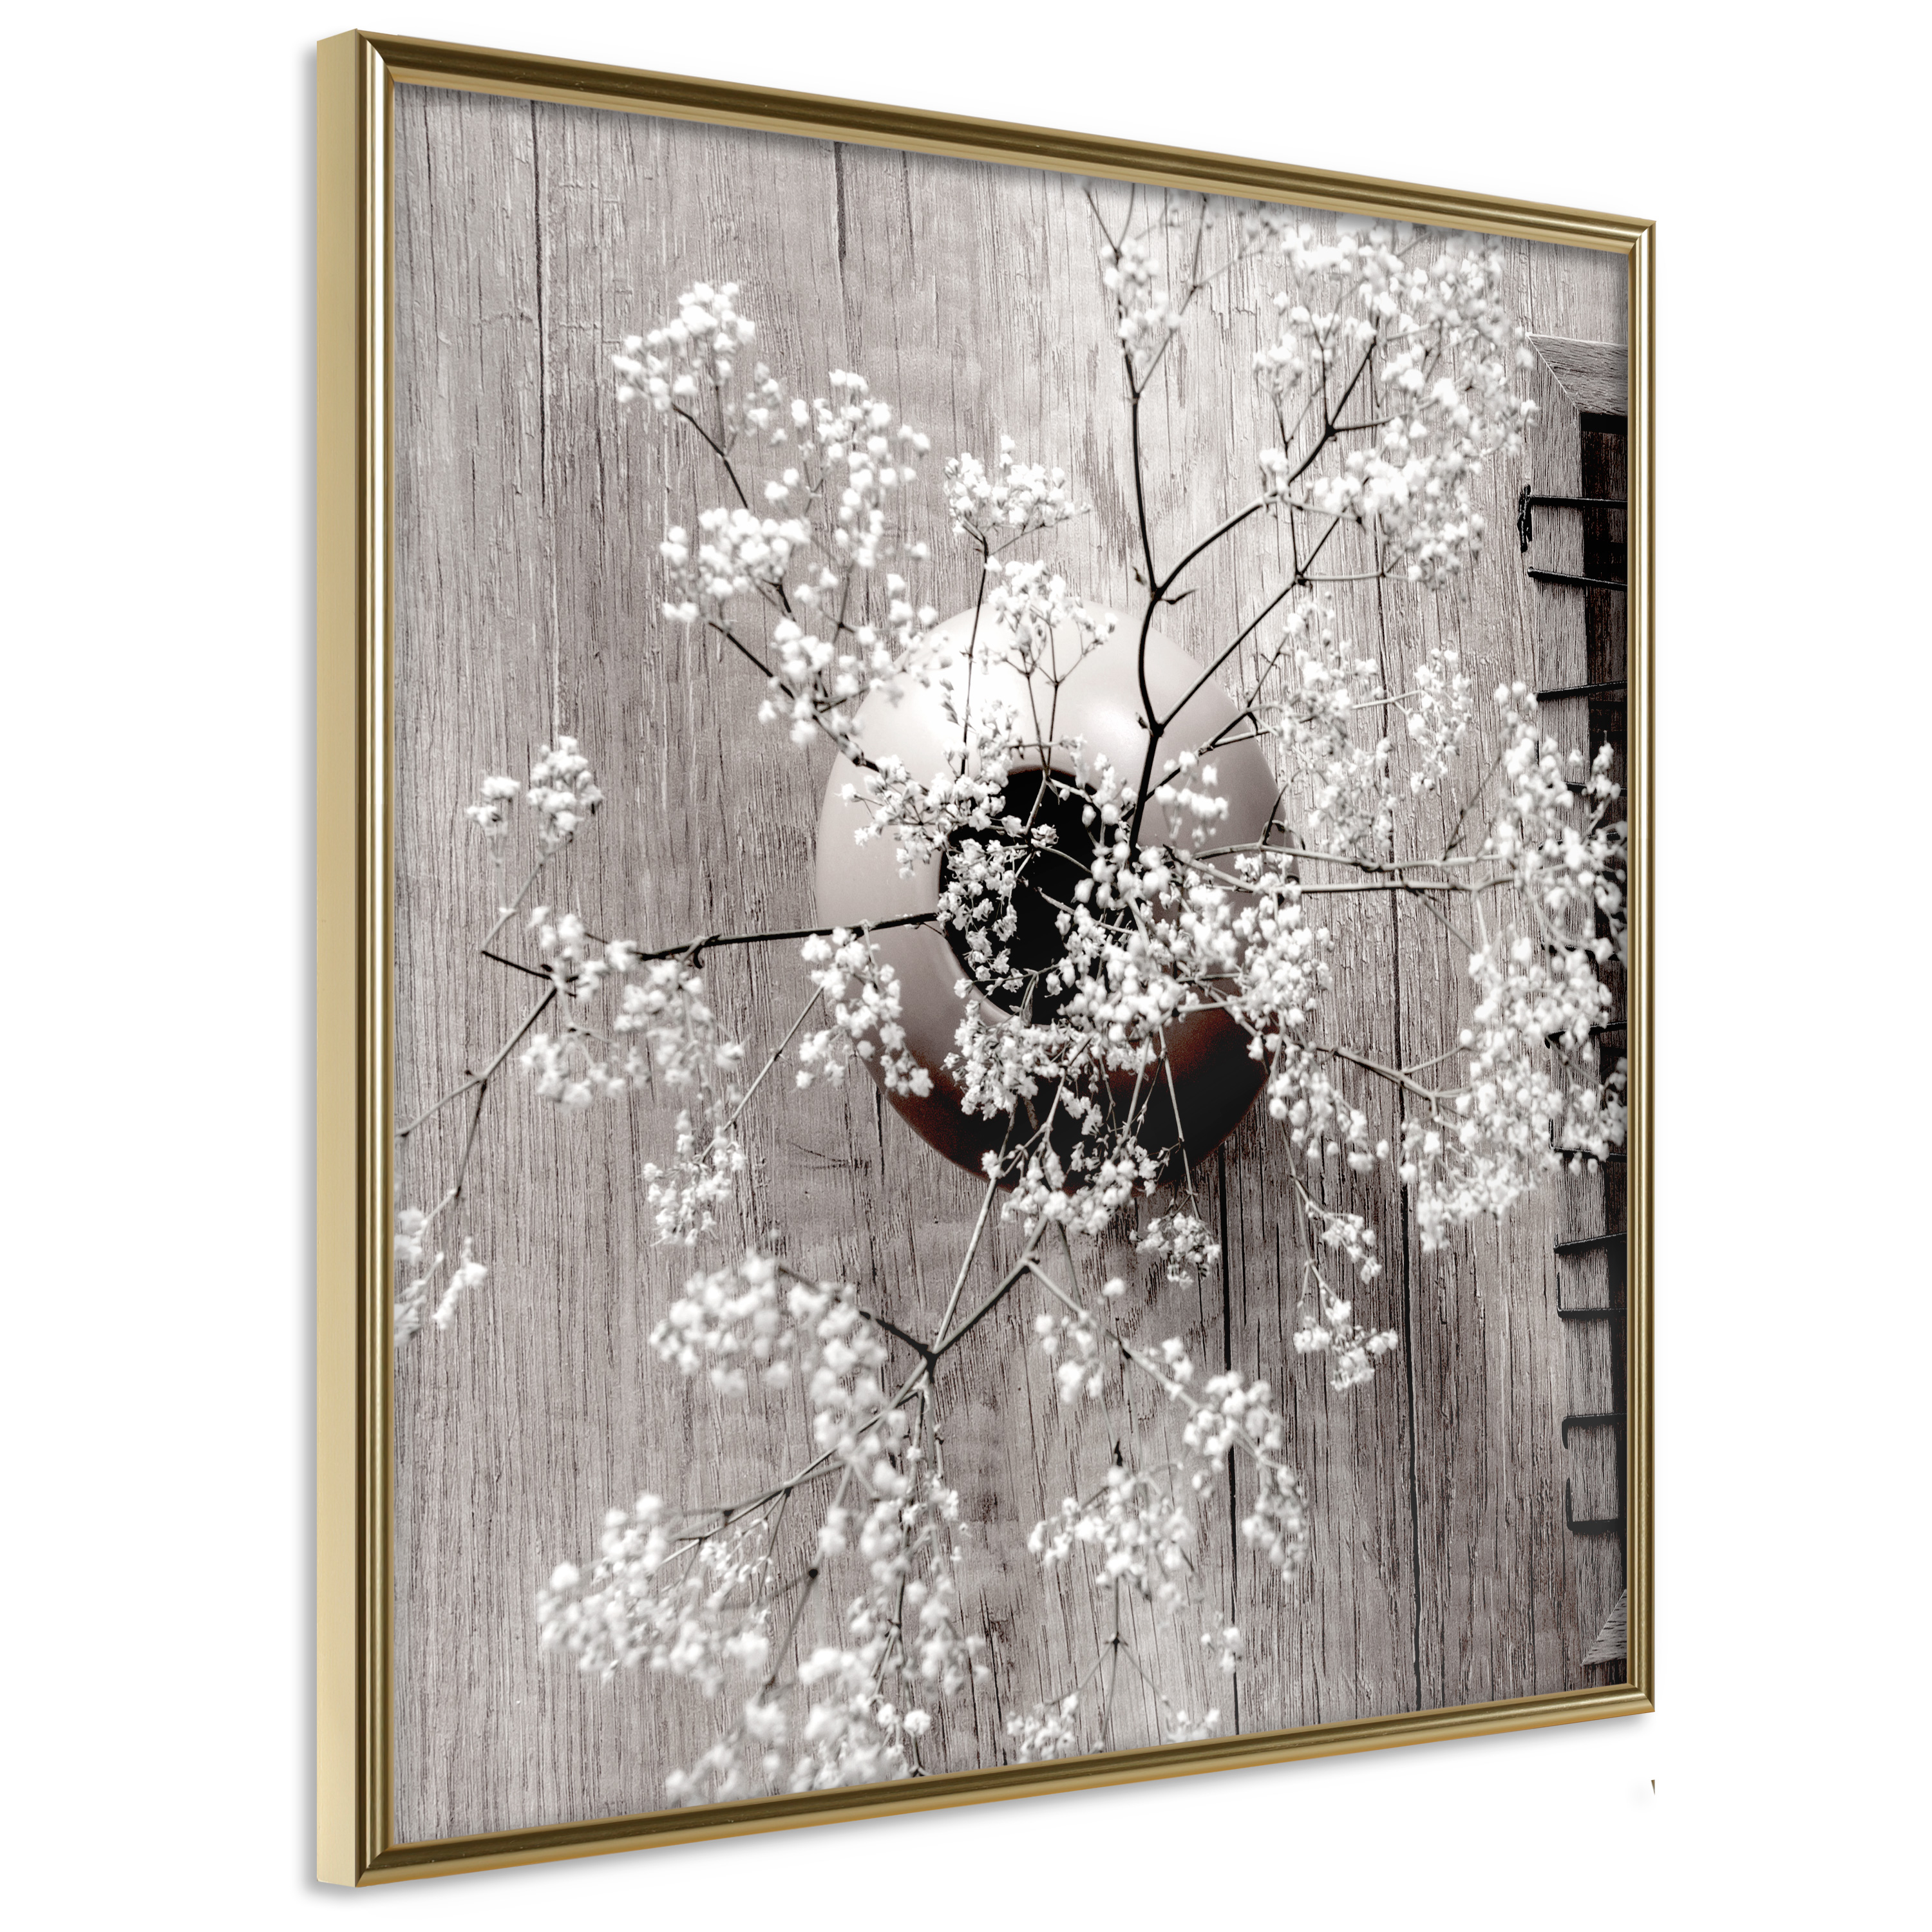 Poster - Reminiscence of Spring (Square) - 20x20